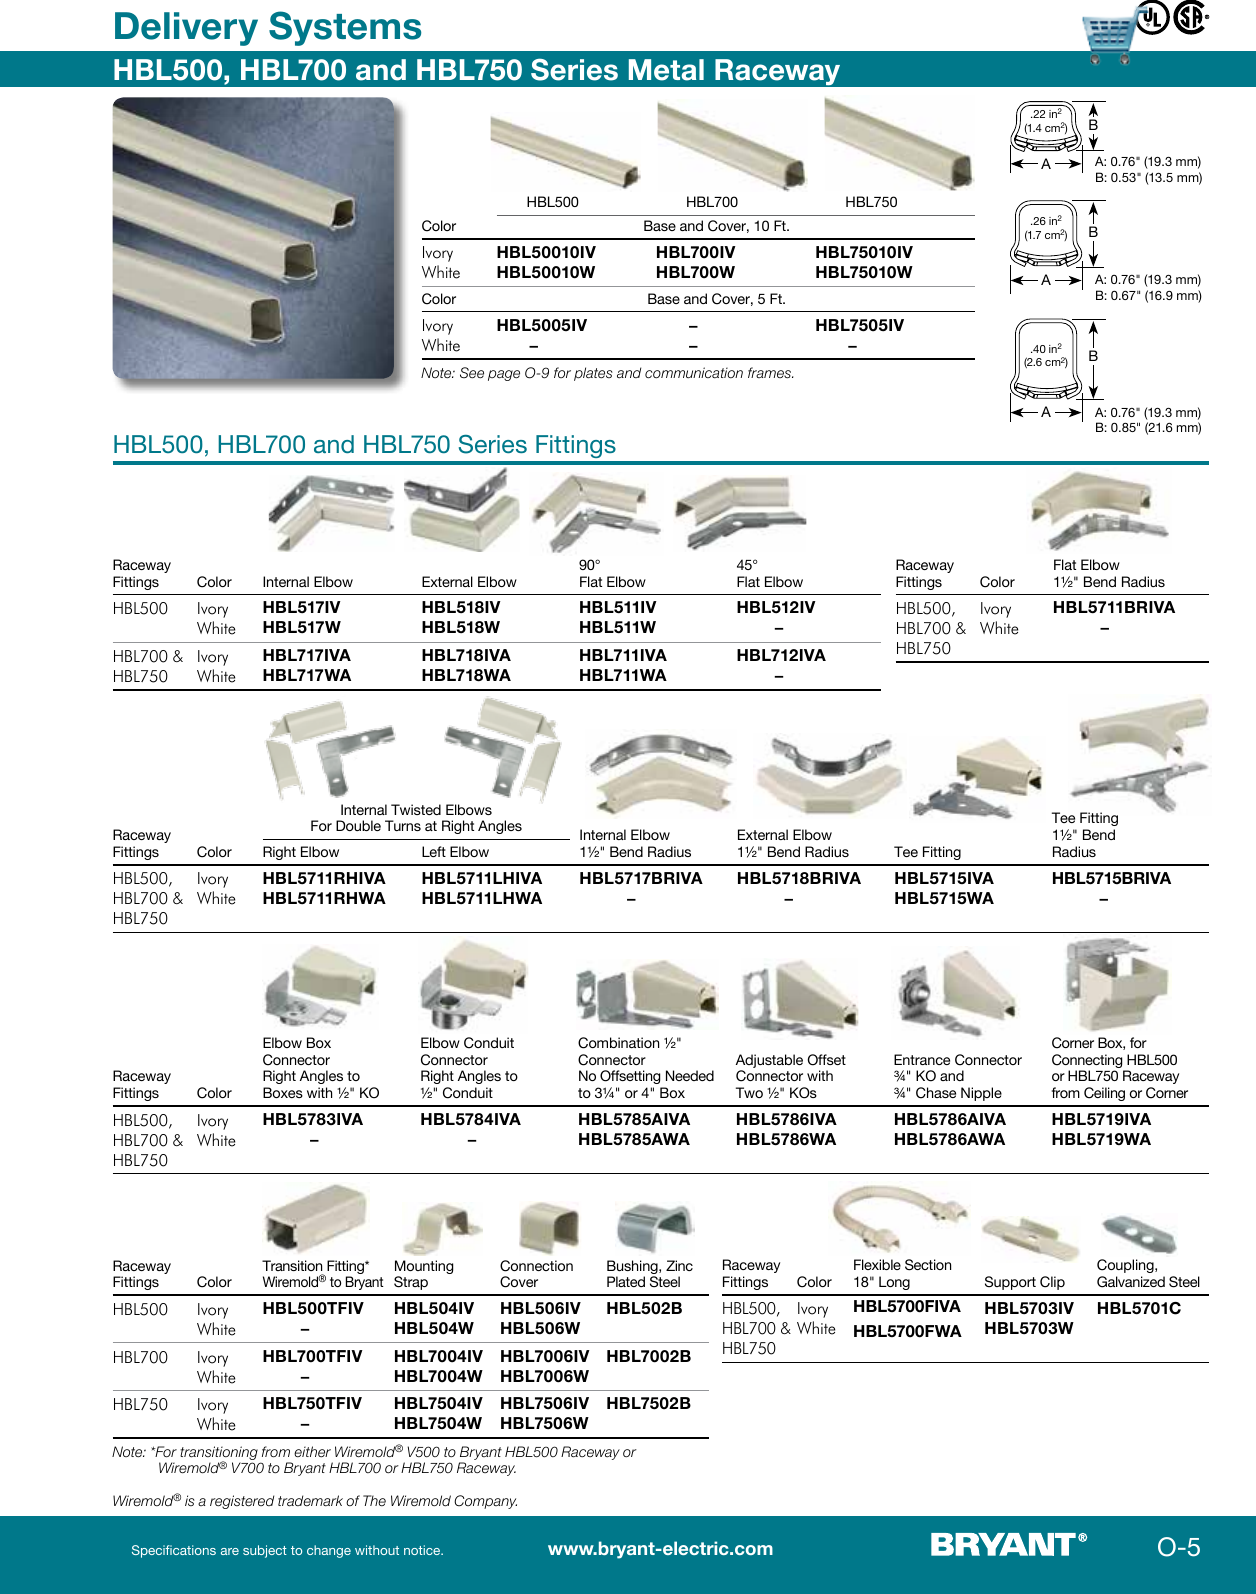 Page 5 of 12 - 1000293193-Catalog